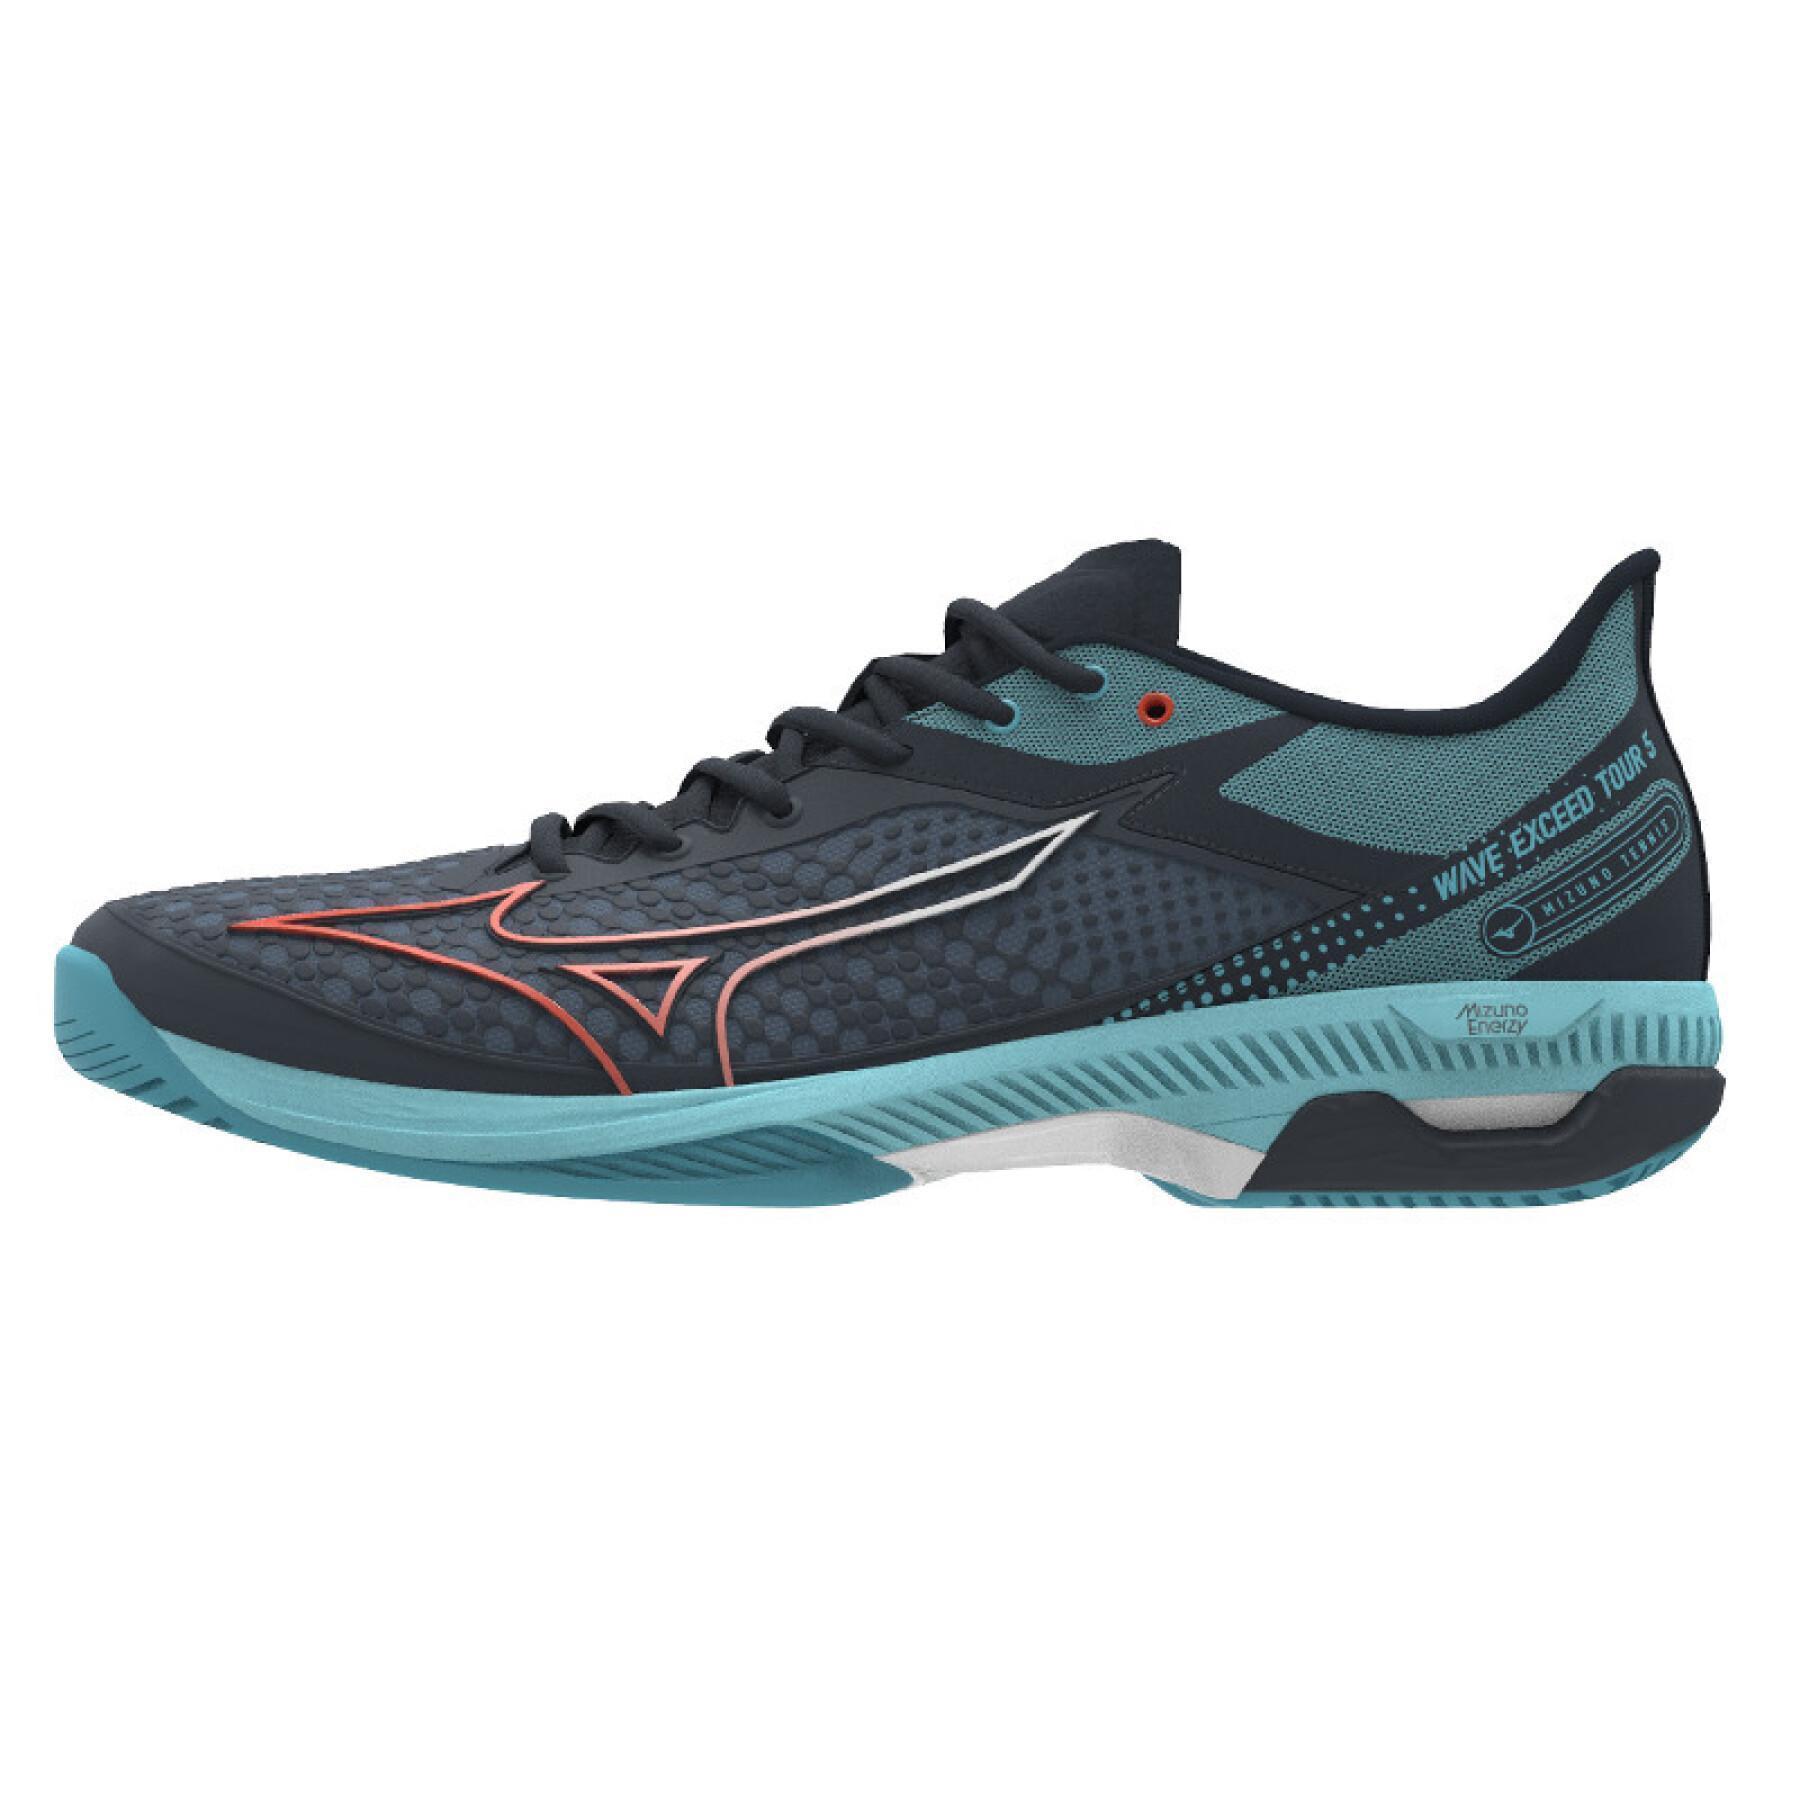 Chaussures Mizuno Hommes Wave Exceed Tour 5 AC